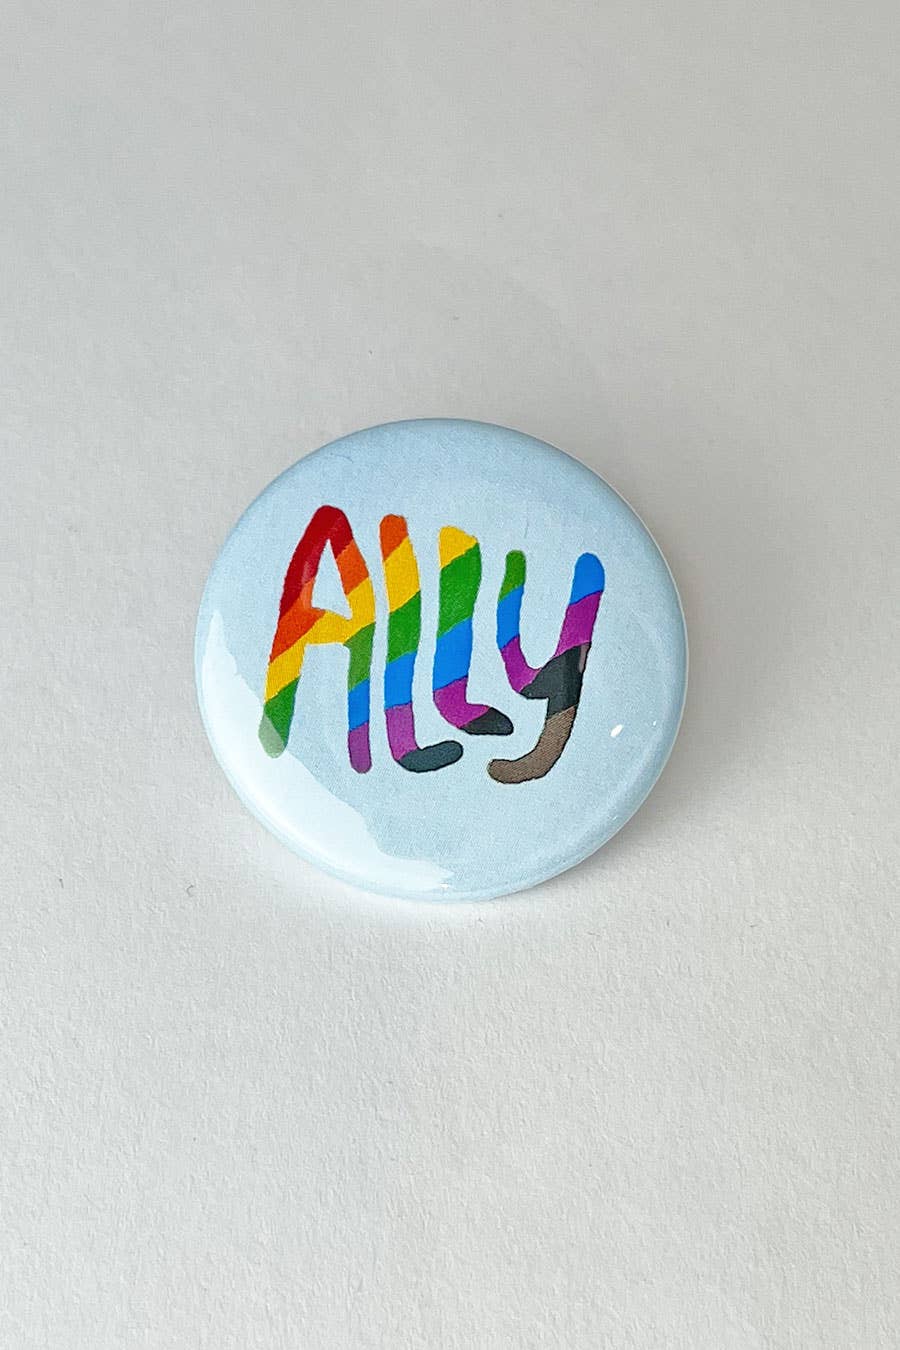 A white pinback button with the word "Ally" printed on it in pride flag colors